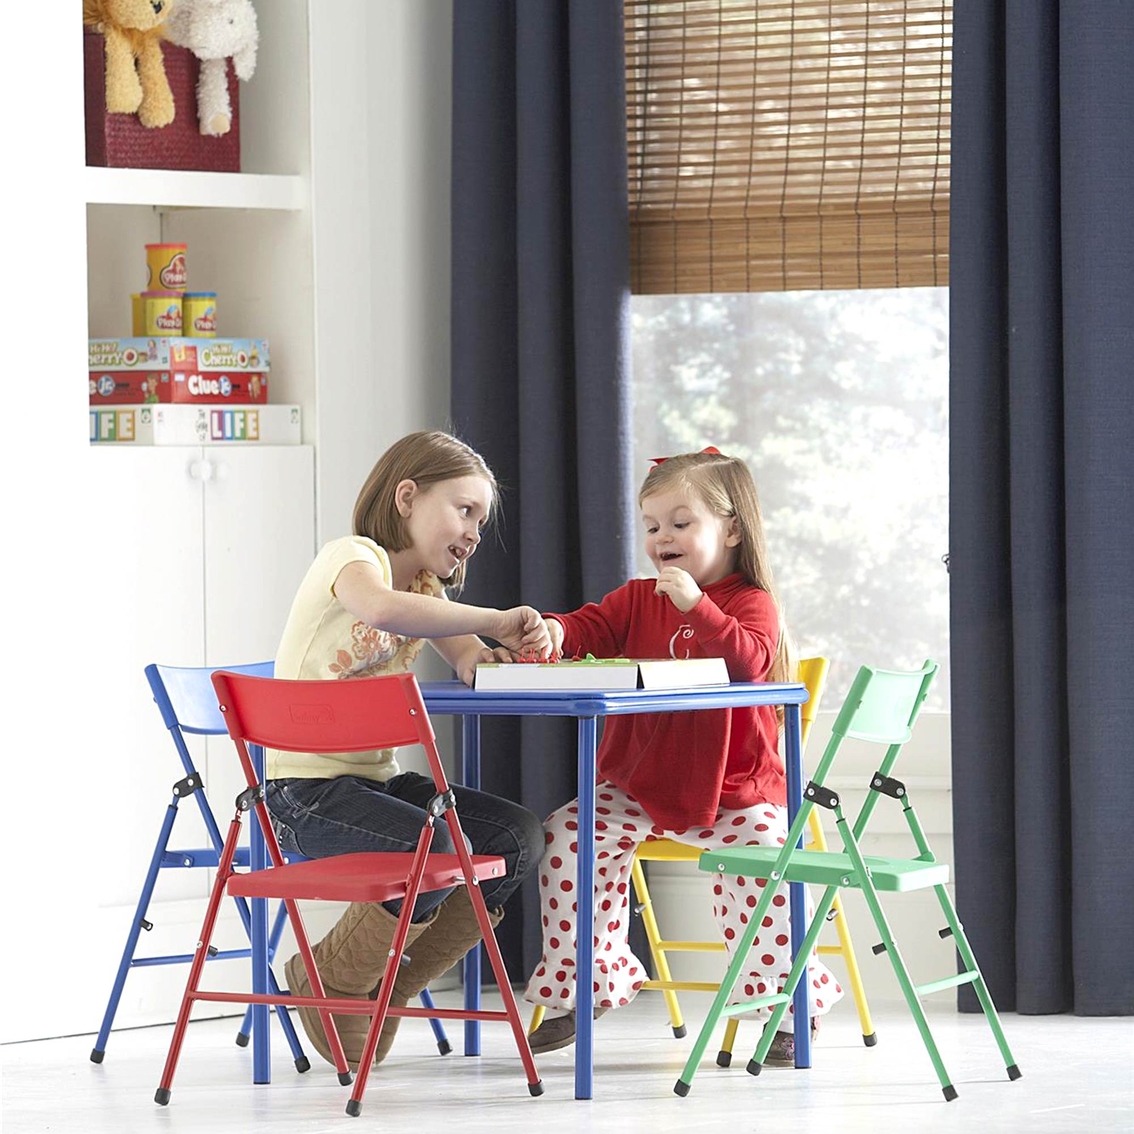 COSCO Kids 5 pc. Folding Chair and Table Set - Image 3 of 3